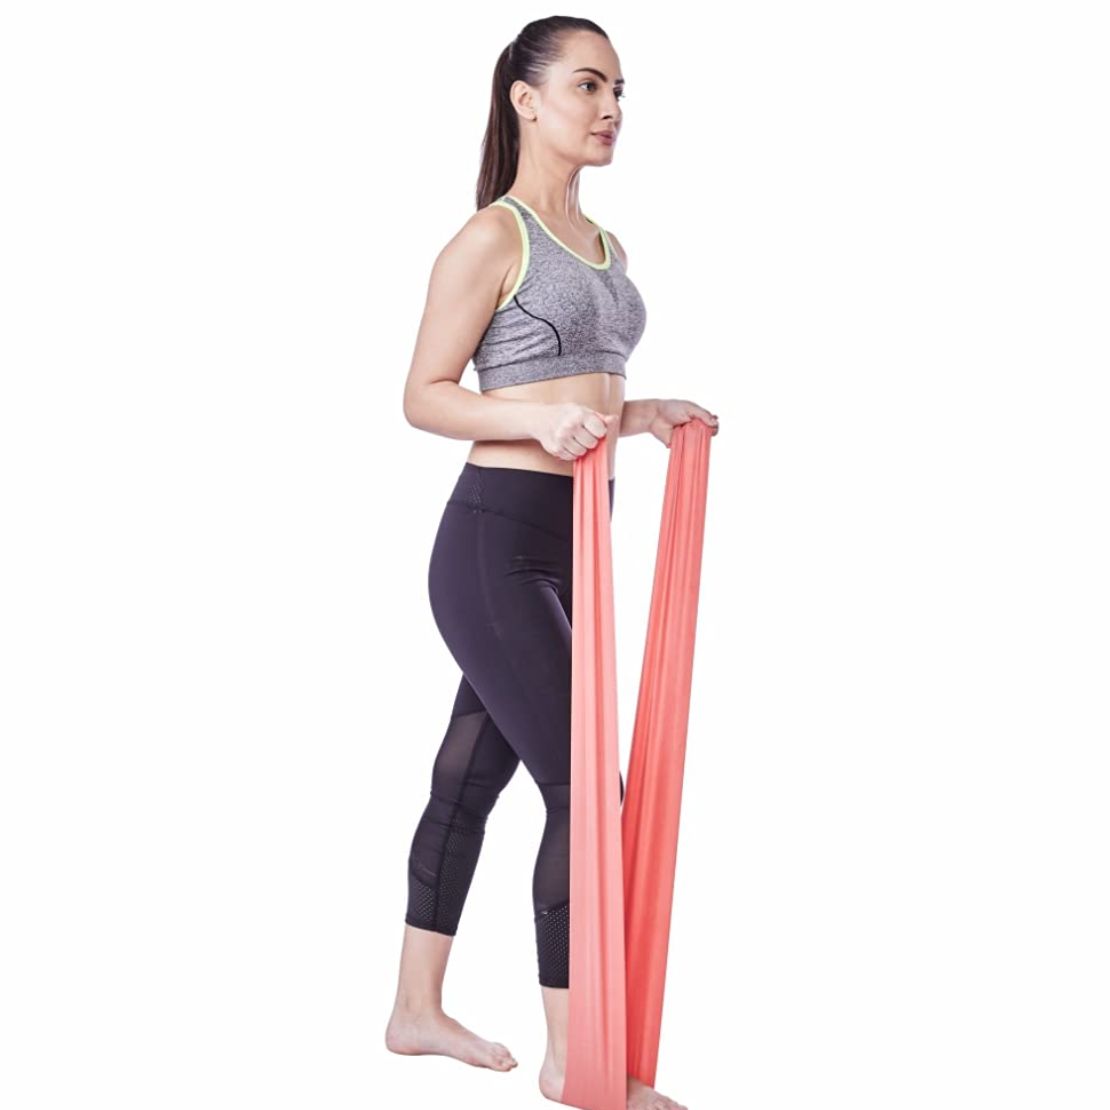 Buy Vissco Active Band is used for physical therapy, rehabilitation and gym exercises, strengthening of muscles and joints, endurance & balance training and sports specific training. 